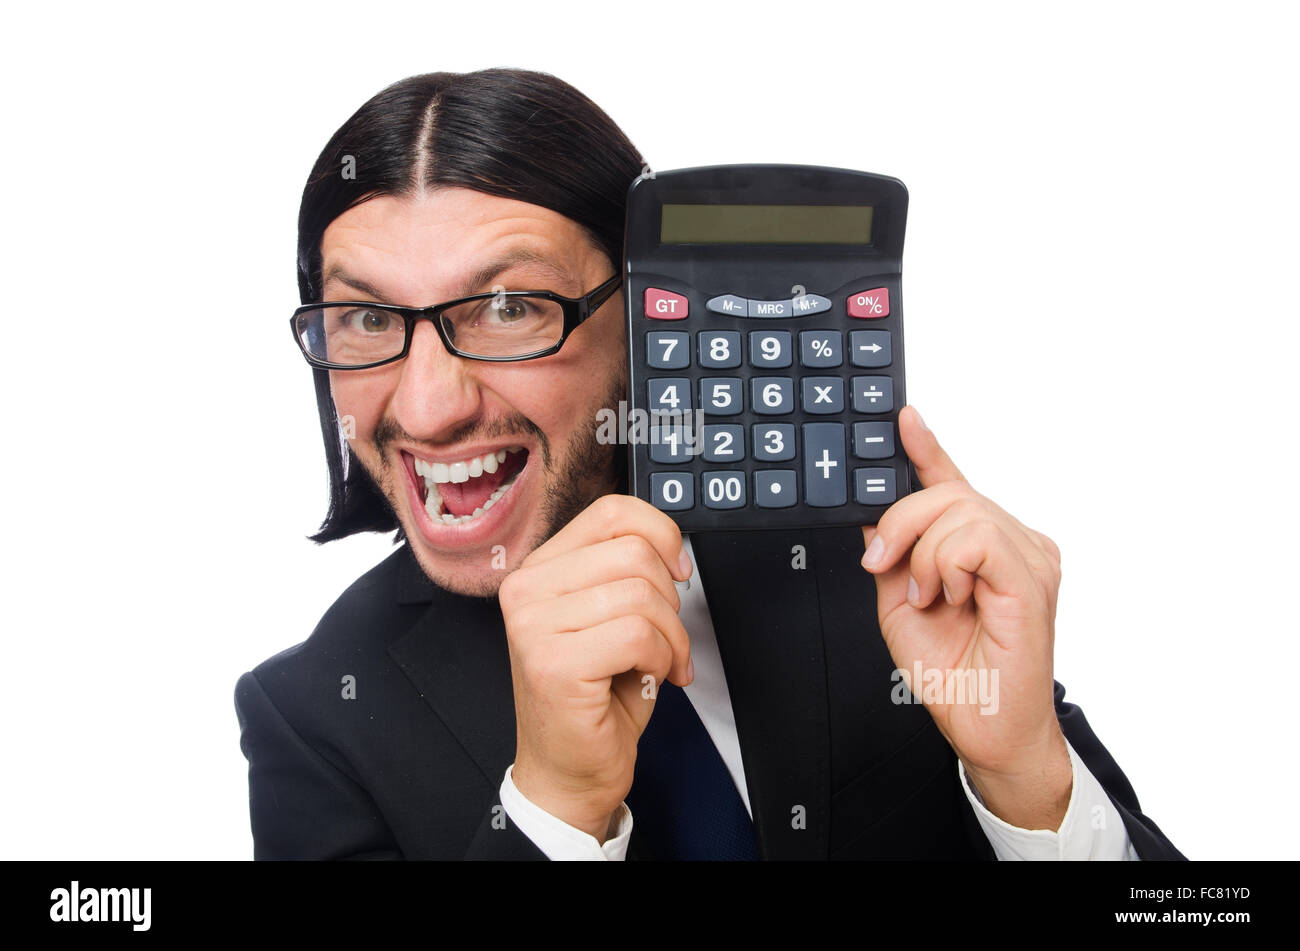 Man with calculator isolated on white Banque D'Images